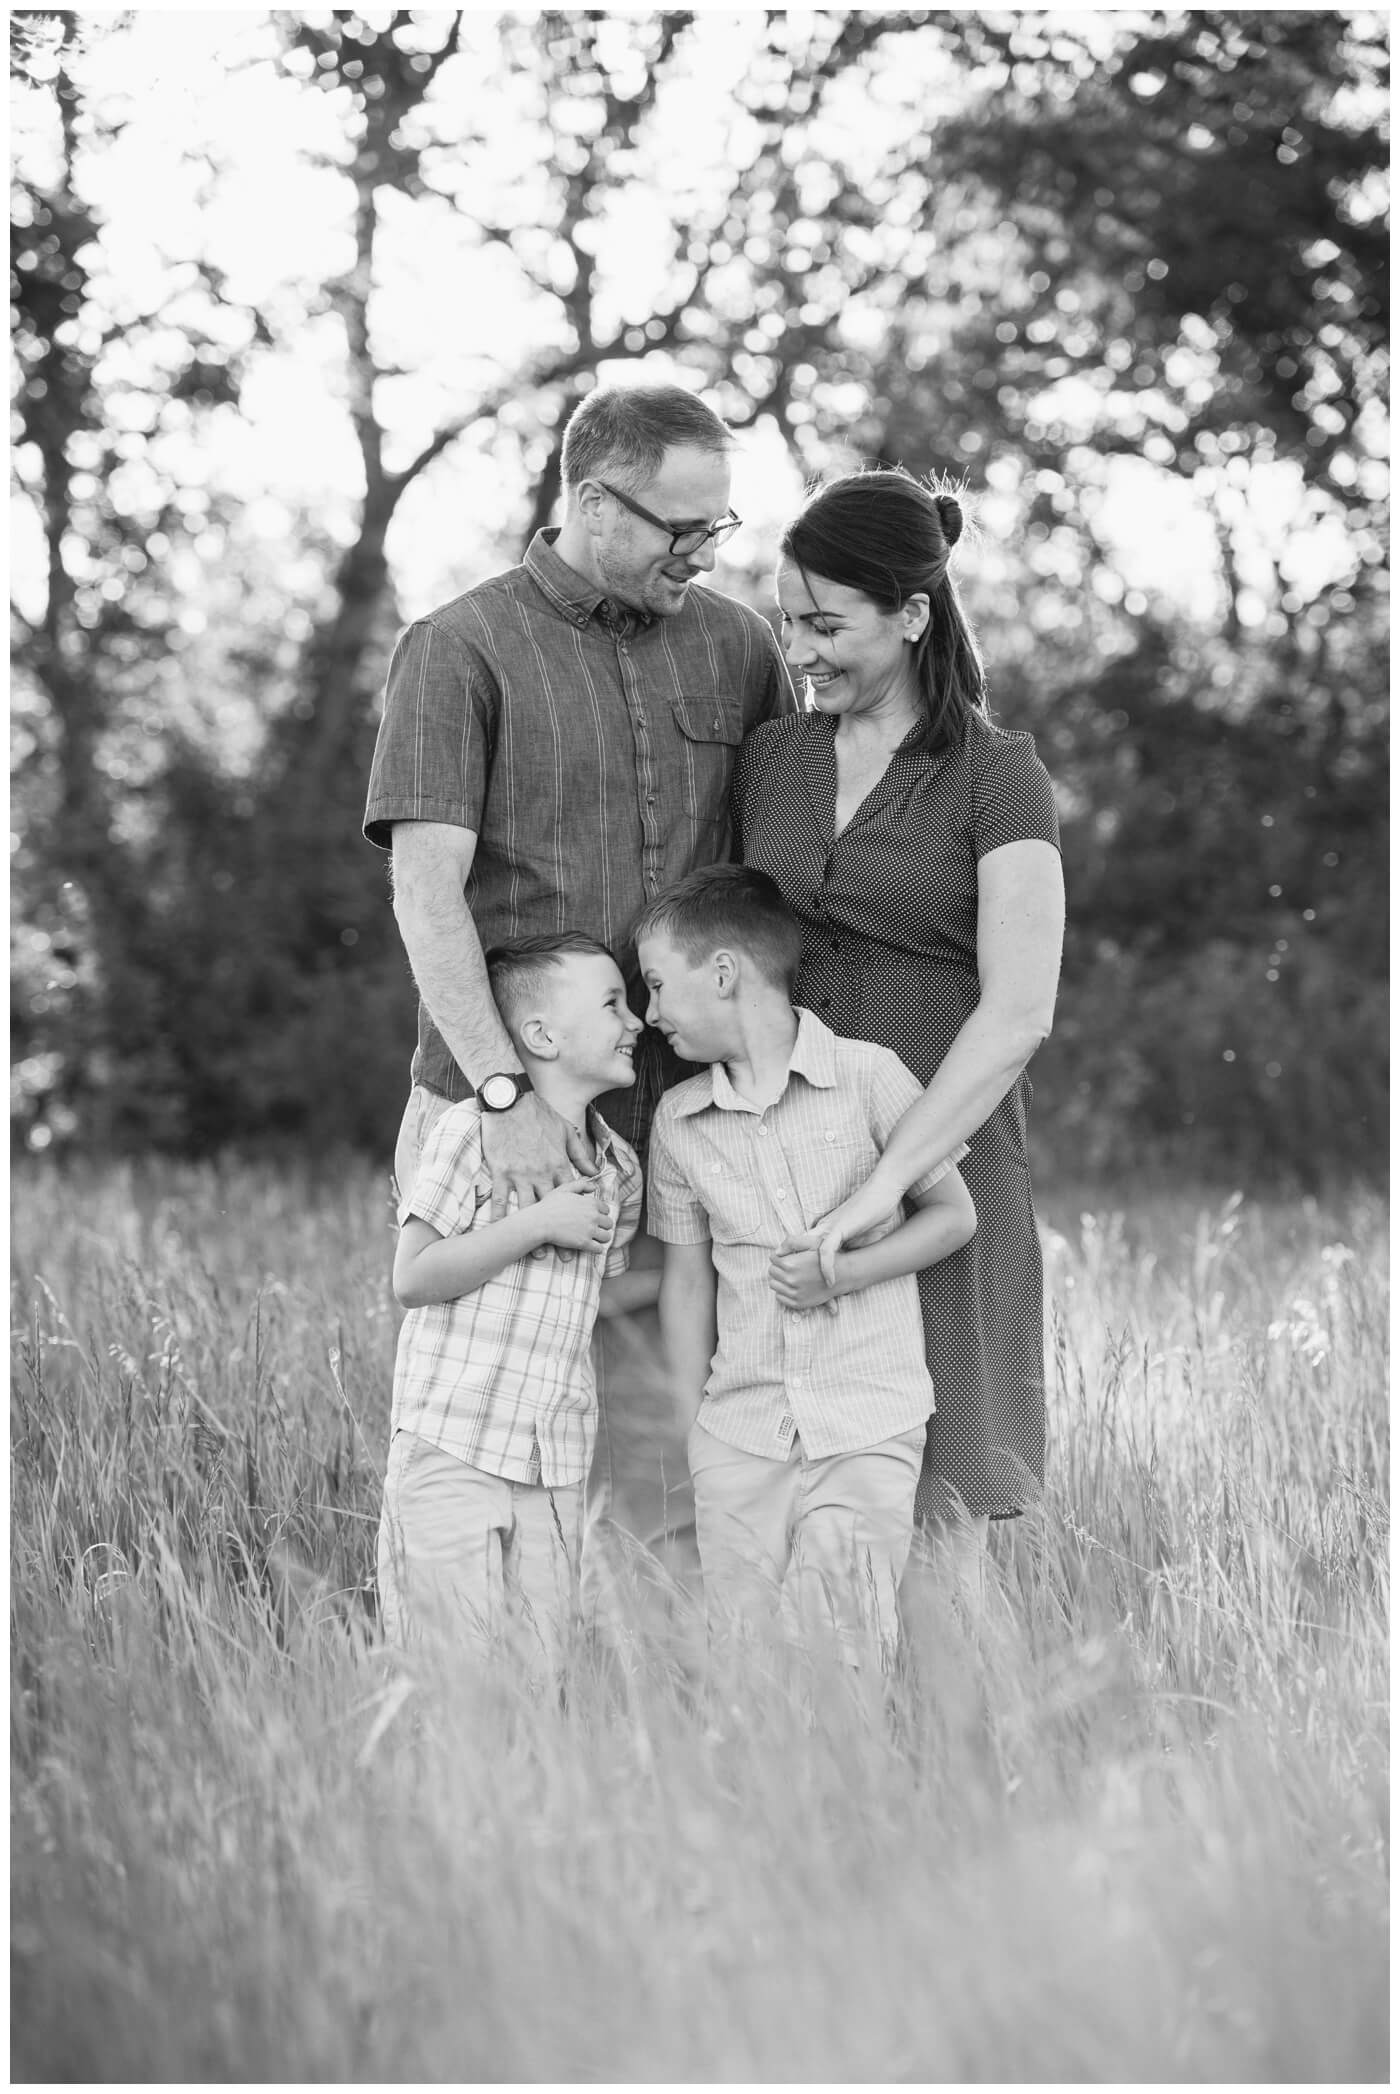 Brent & Courtney -03 - Black and white of family at wascana habitat conservation area